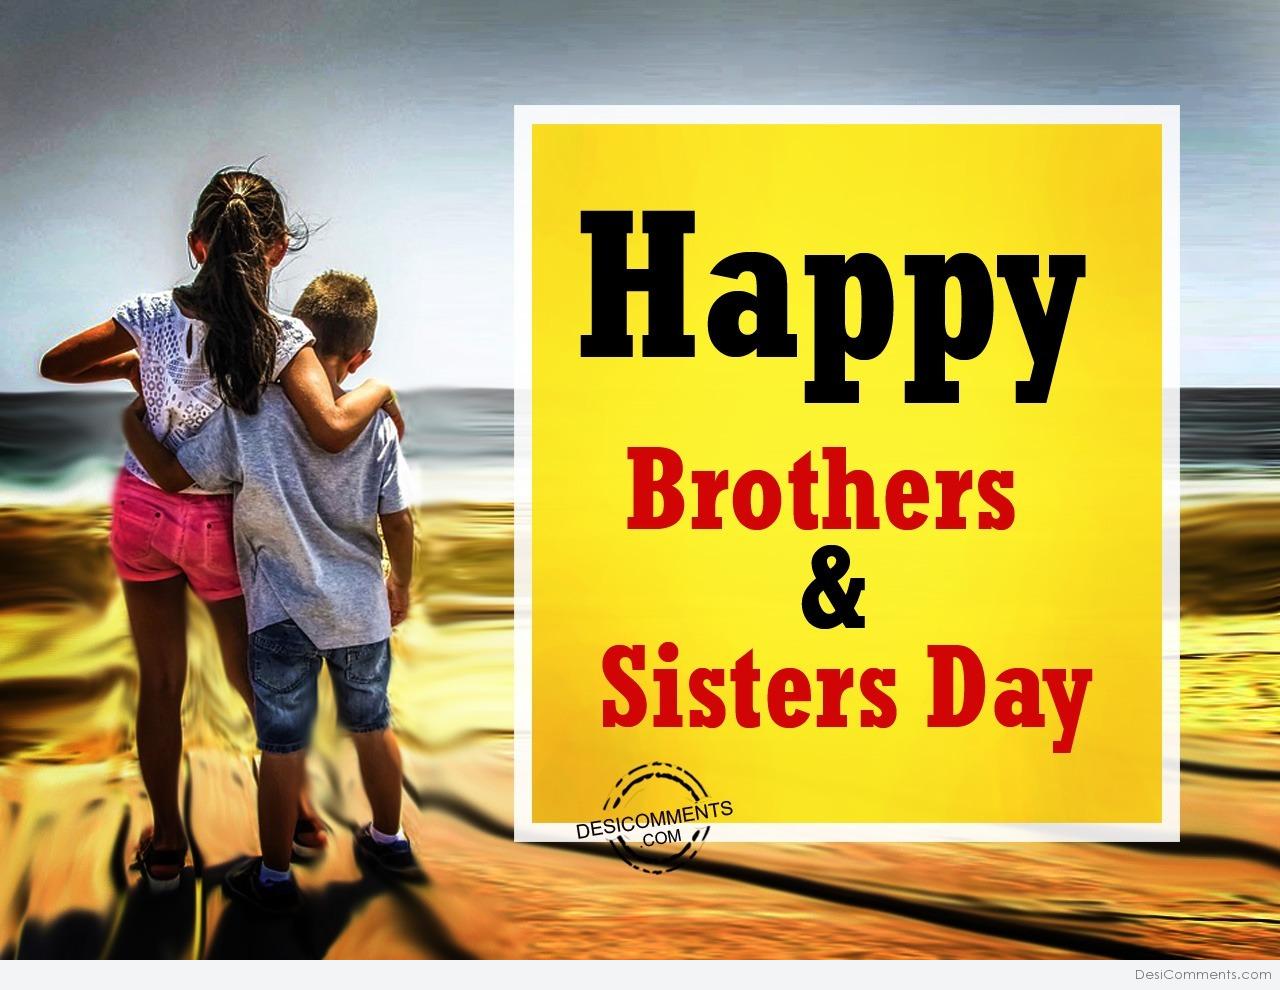 Free download 11 Brothers And Sisters Day Picture Image Photo [1280x990] for your Desktop, Mobile & Tablet. Explore Happy Brother's Day Wallpaper. Happy Brother's Day Wallpaper, Brother's Day Wallpaper, Happy Day Wallpaper